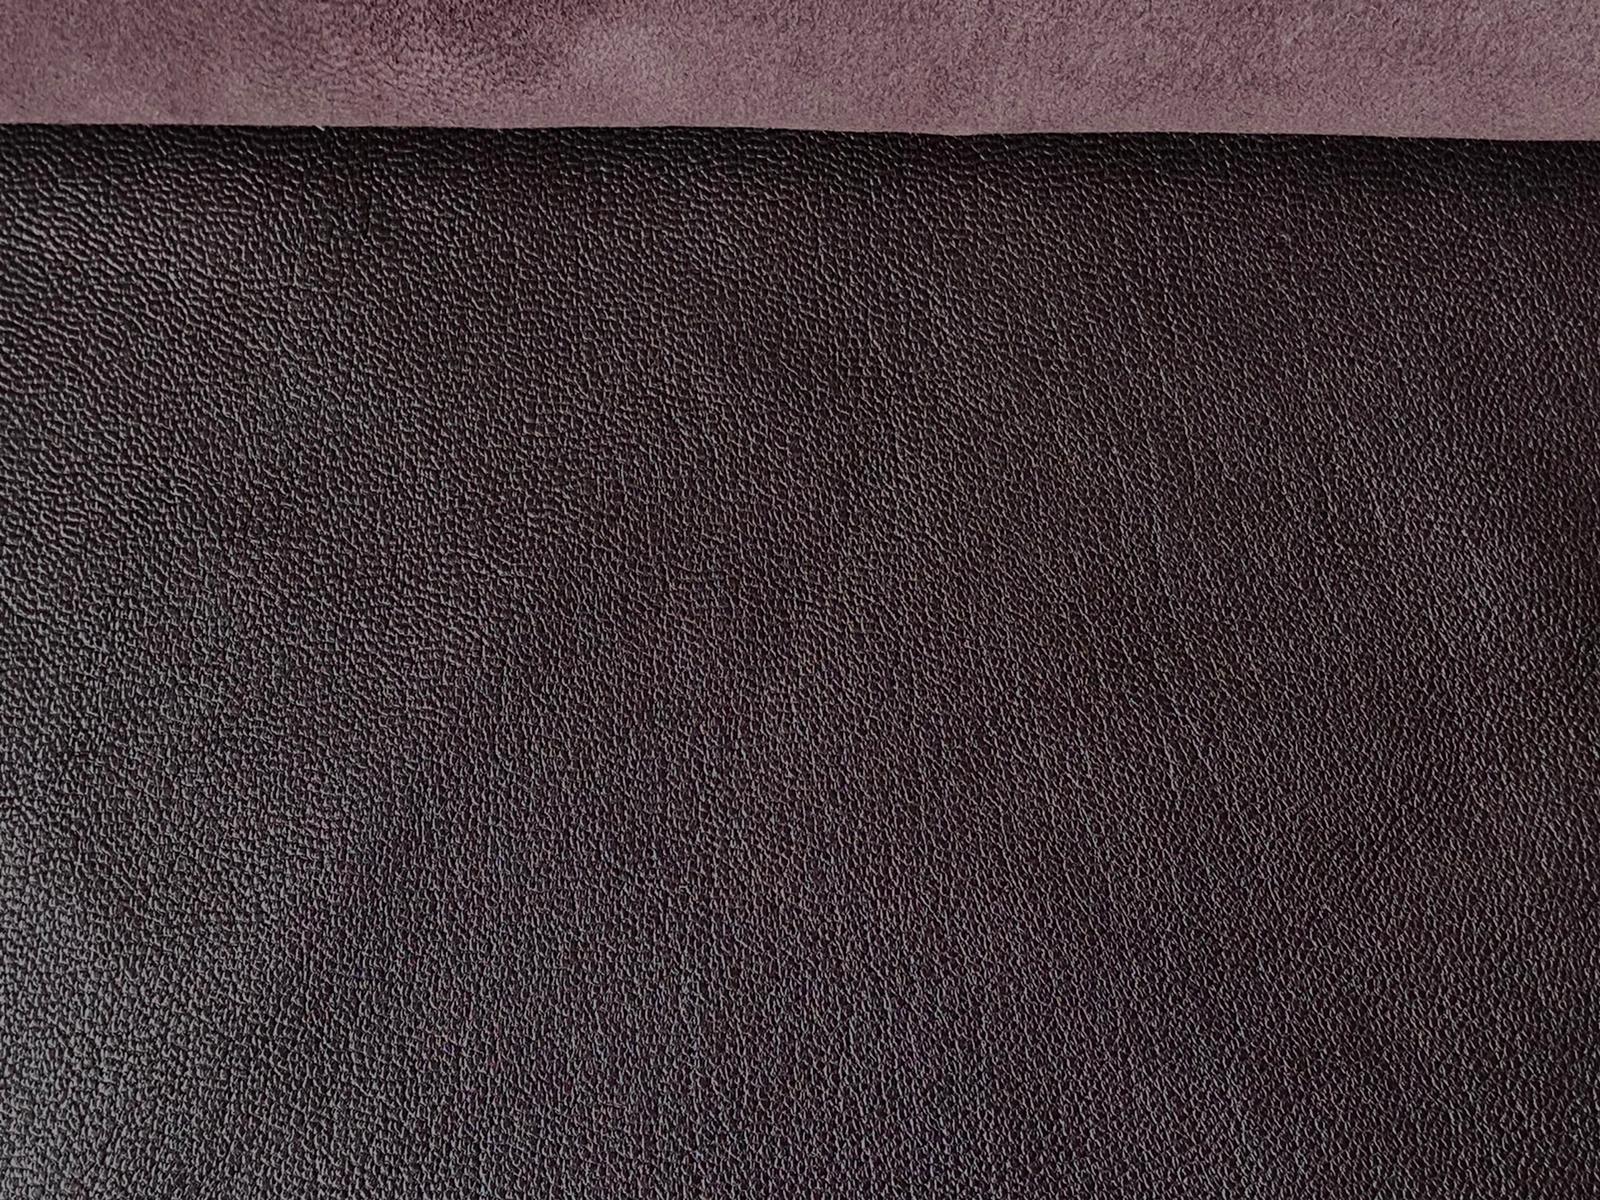 Goat Nappa Dark Brown (0.7-0.8mm) : Perfect For Leather Crafts, Leather Bookbinding & Leather Accessories.